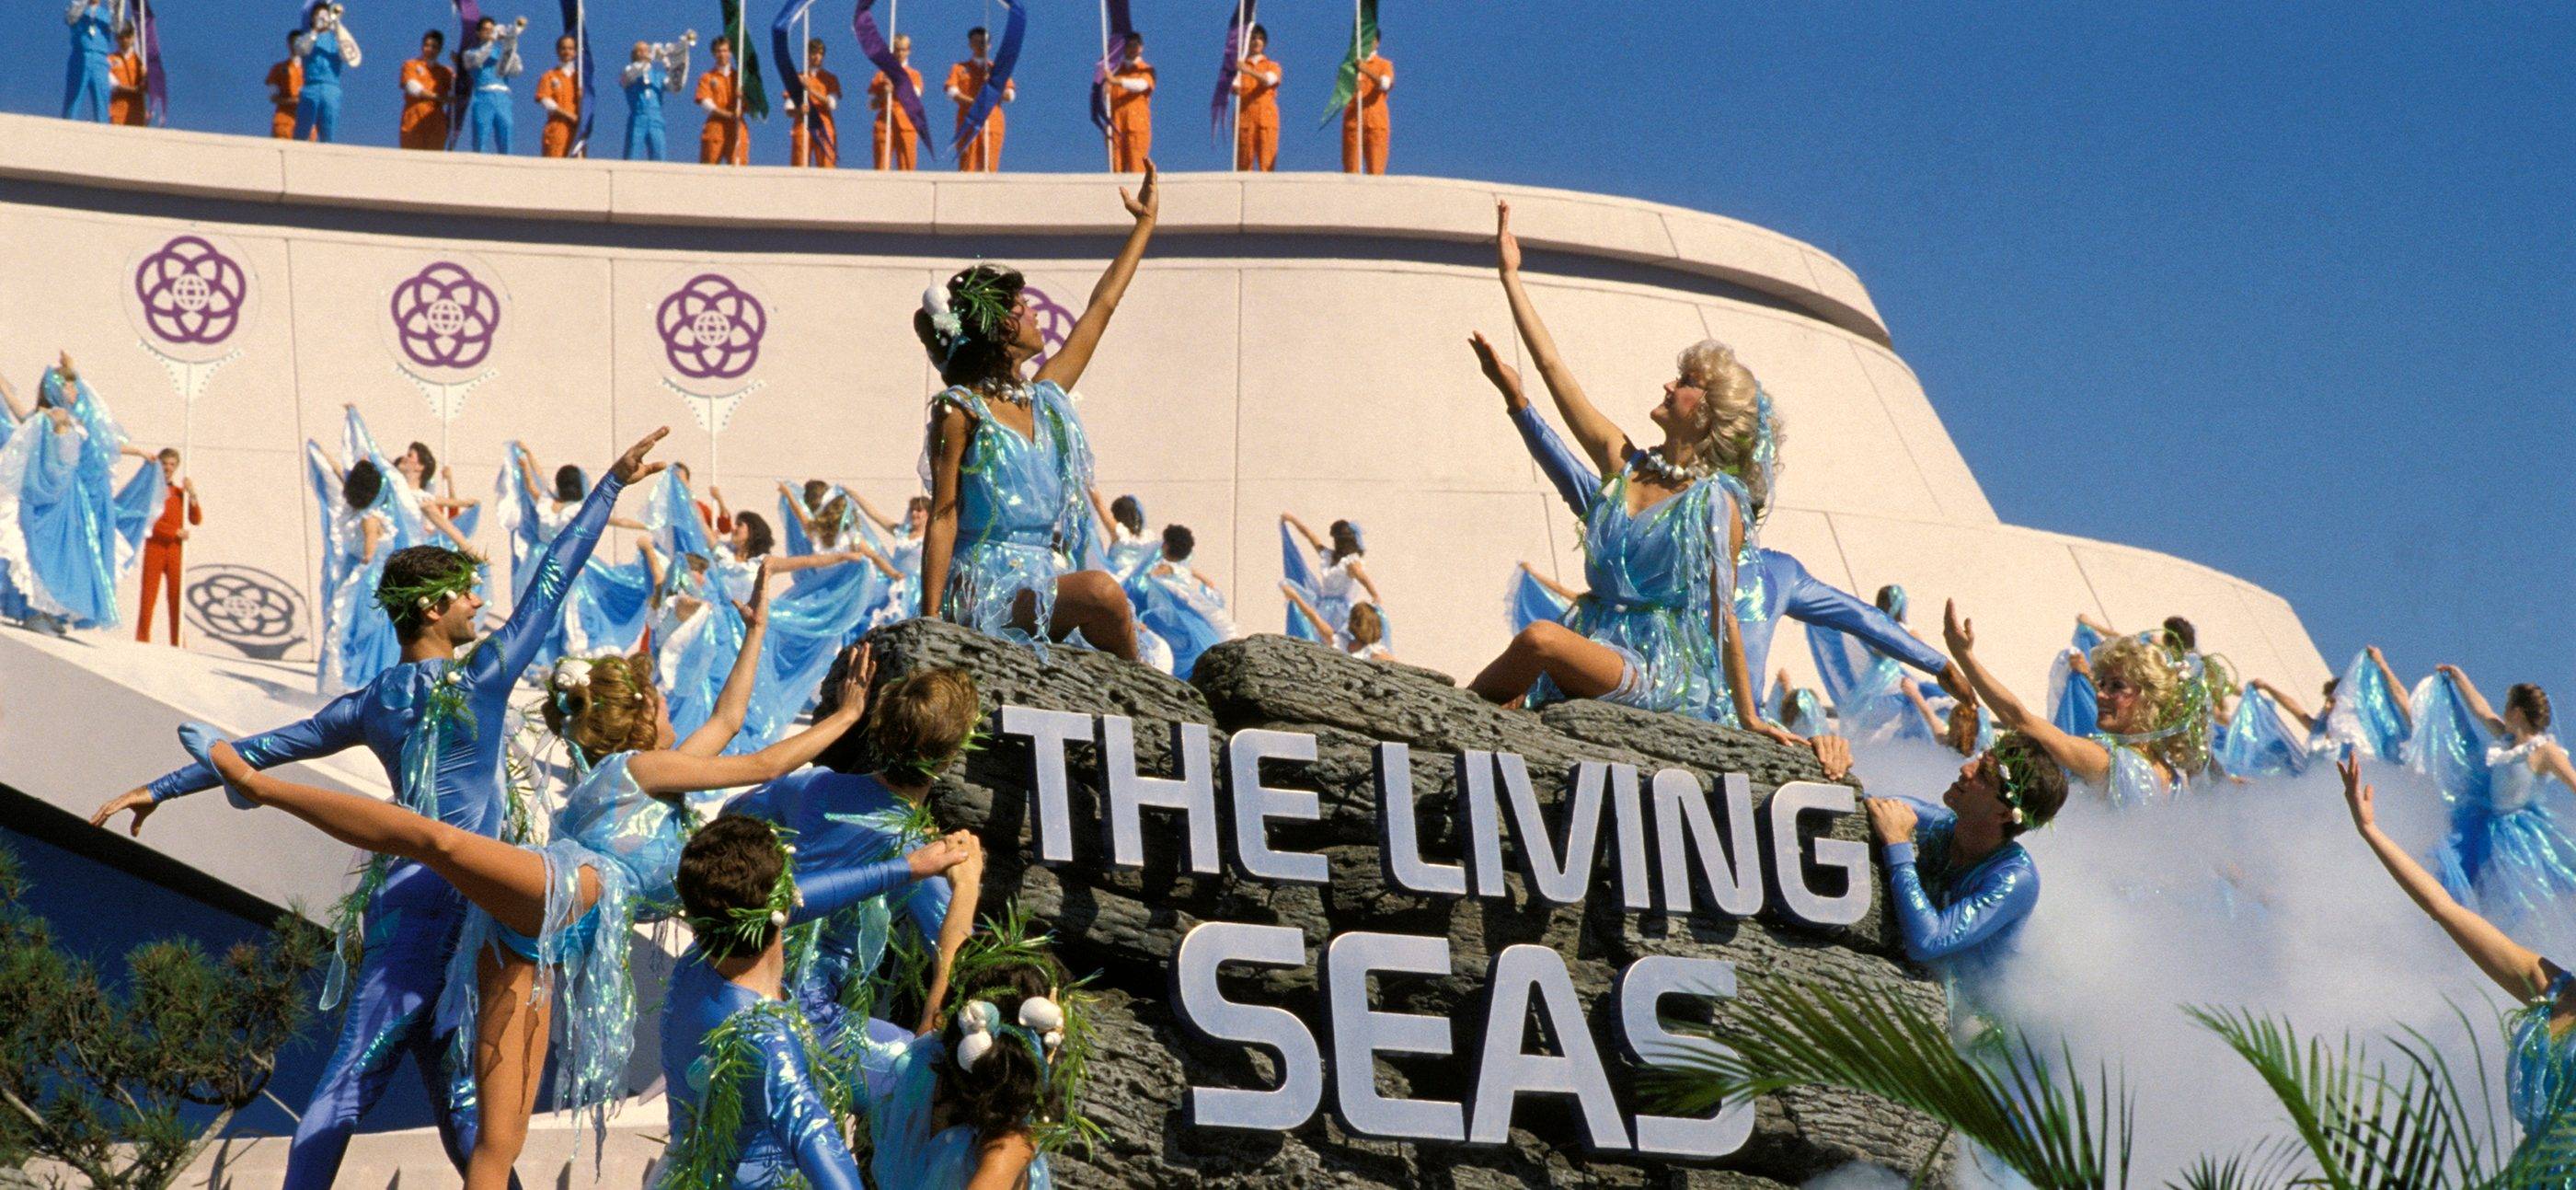 On Jan. 15, 1986, The Living Seas (now The Seas with Nemo & Friends) opens in EPCOT